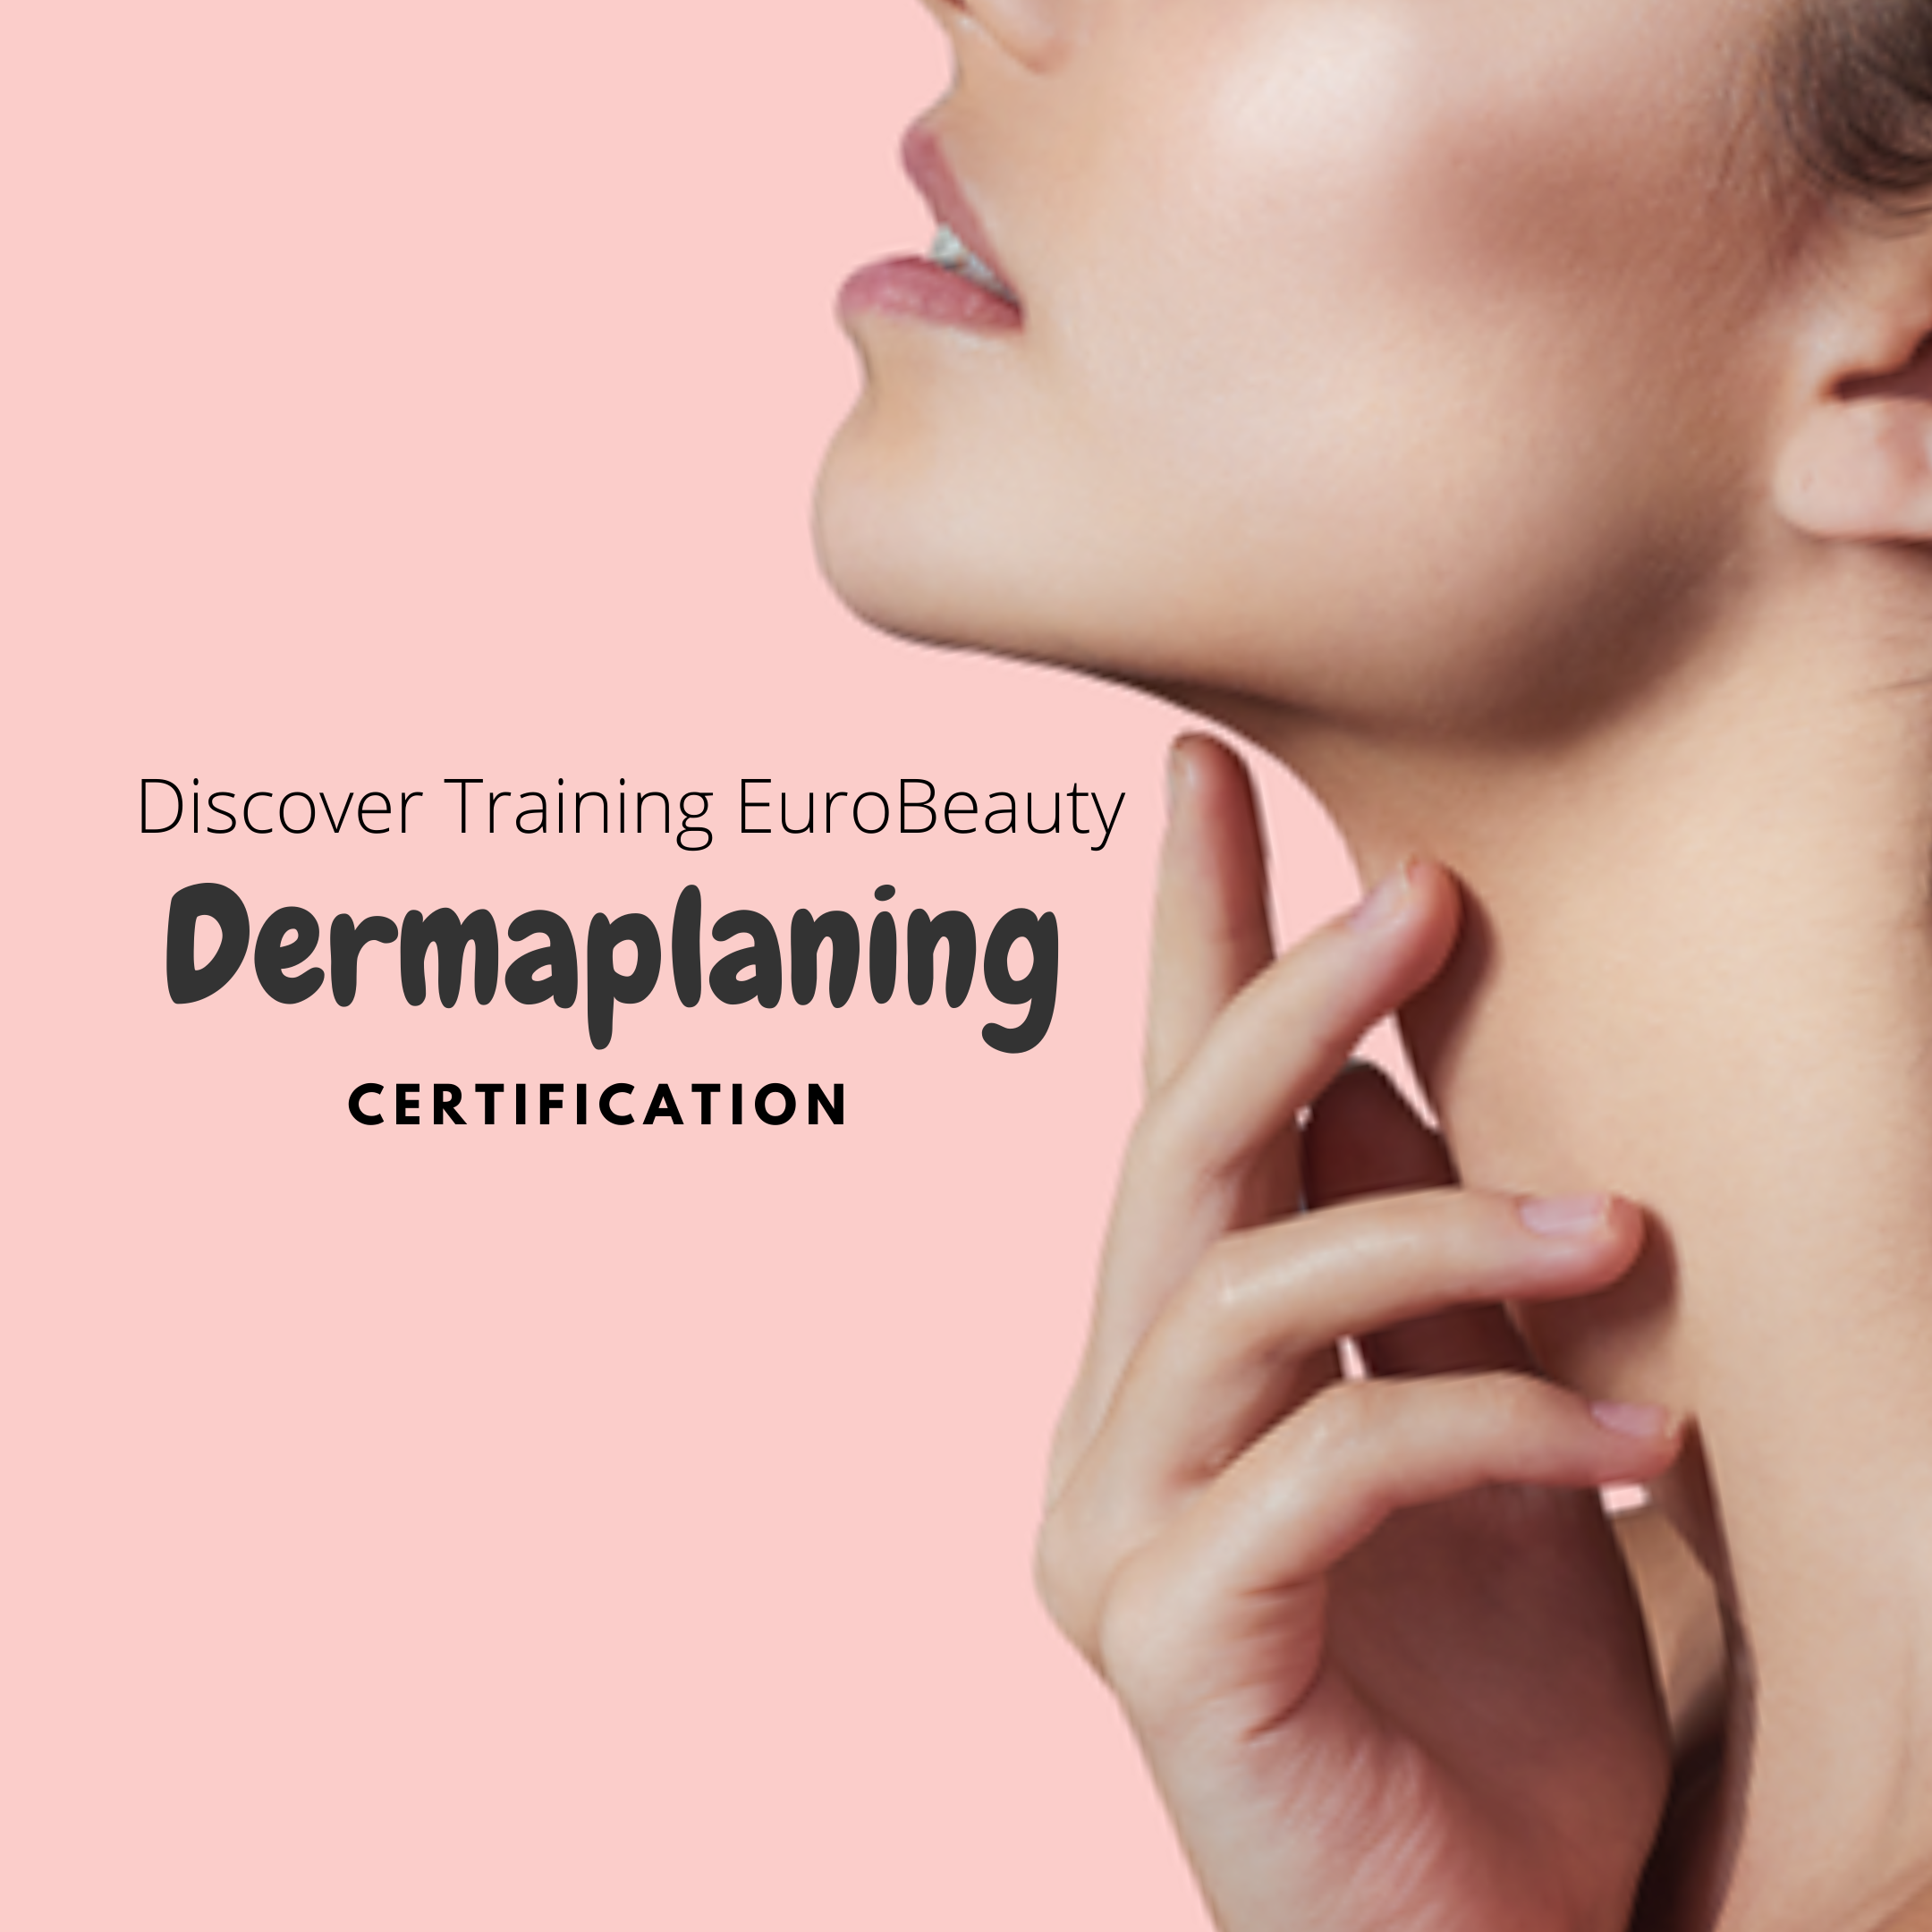 Dermaplaning Certification Course